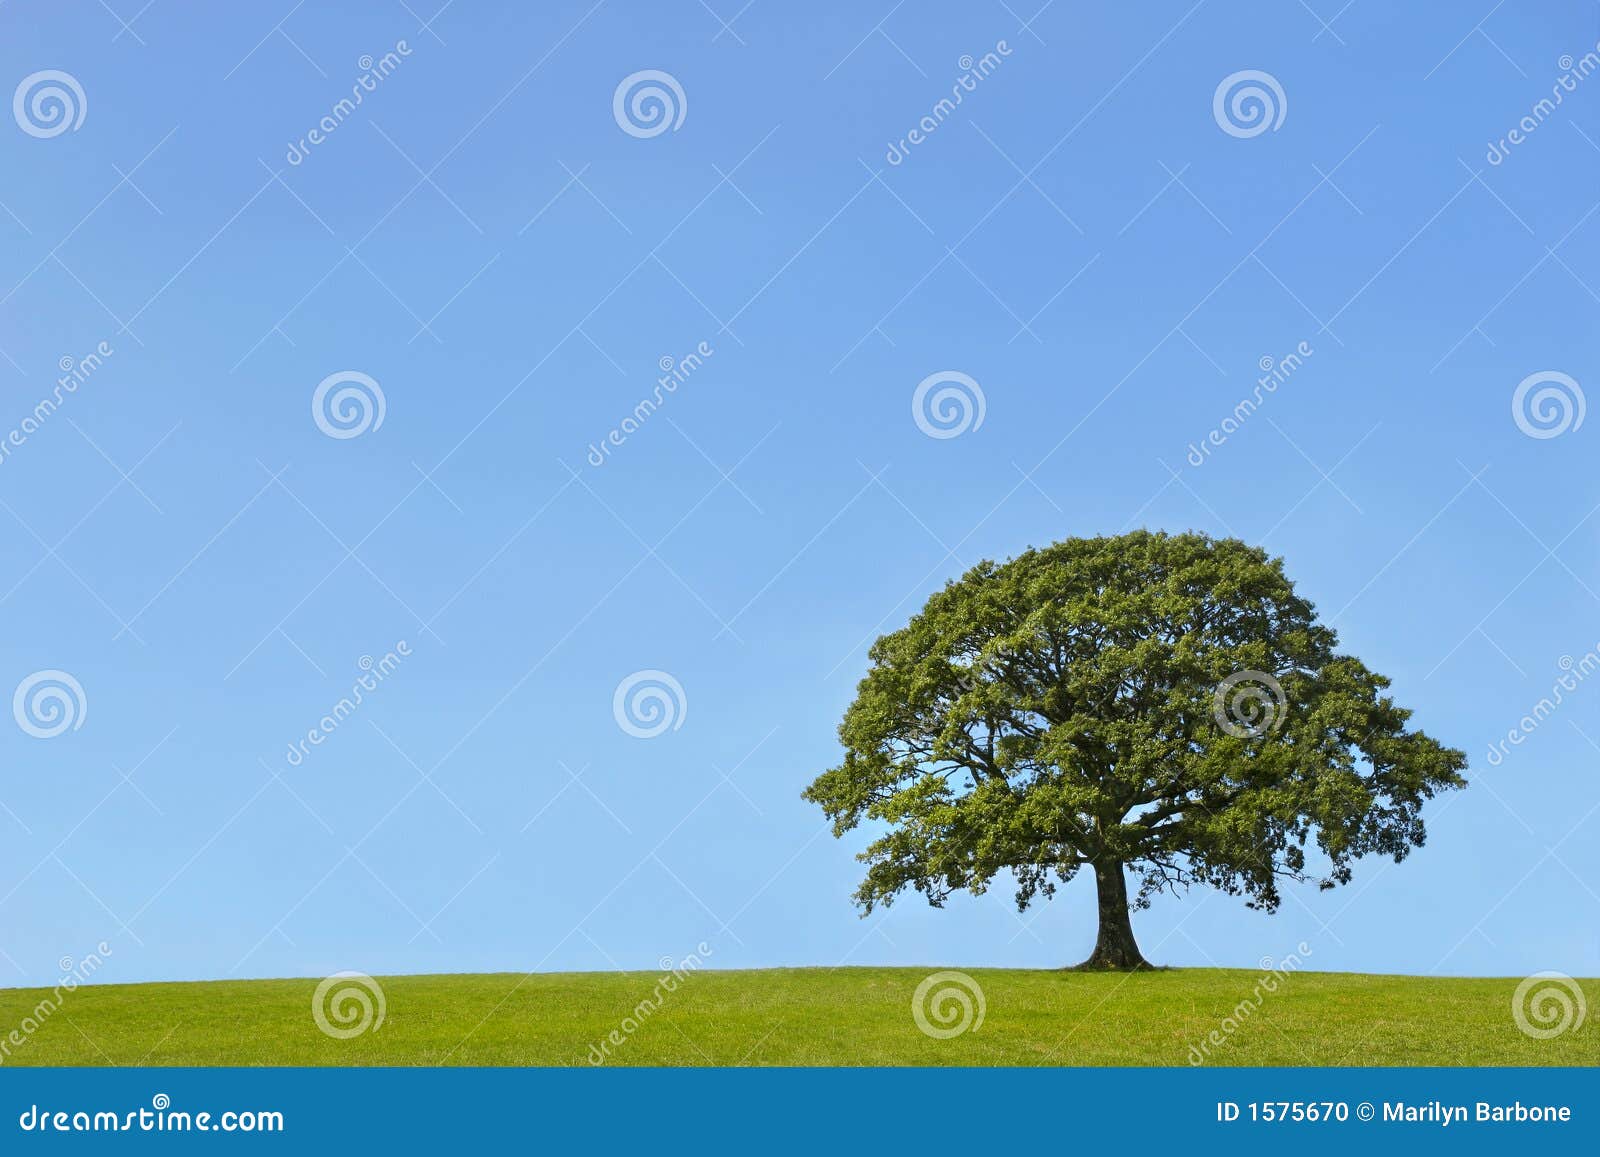 The Ancient Oak in Summer. Oak tree in a field in Summer, with grass to the foreground, set against a clear blue sky.